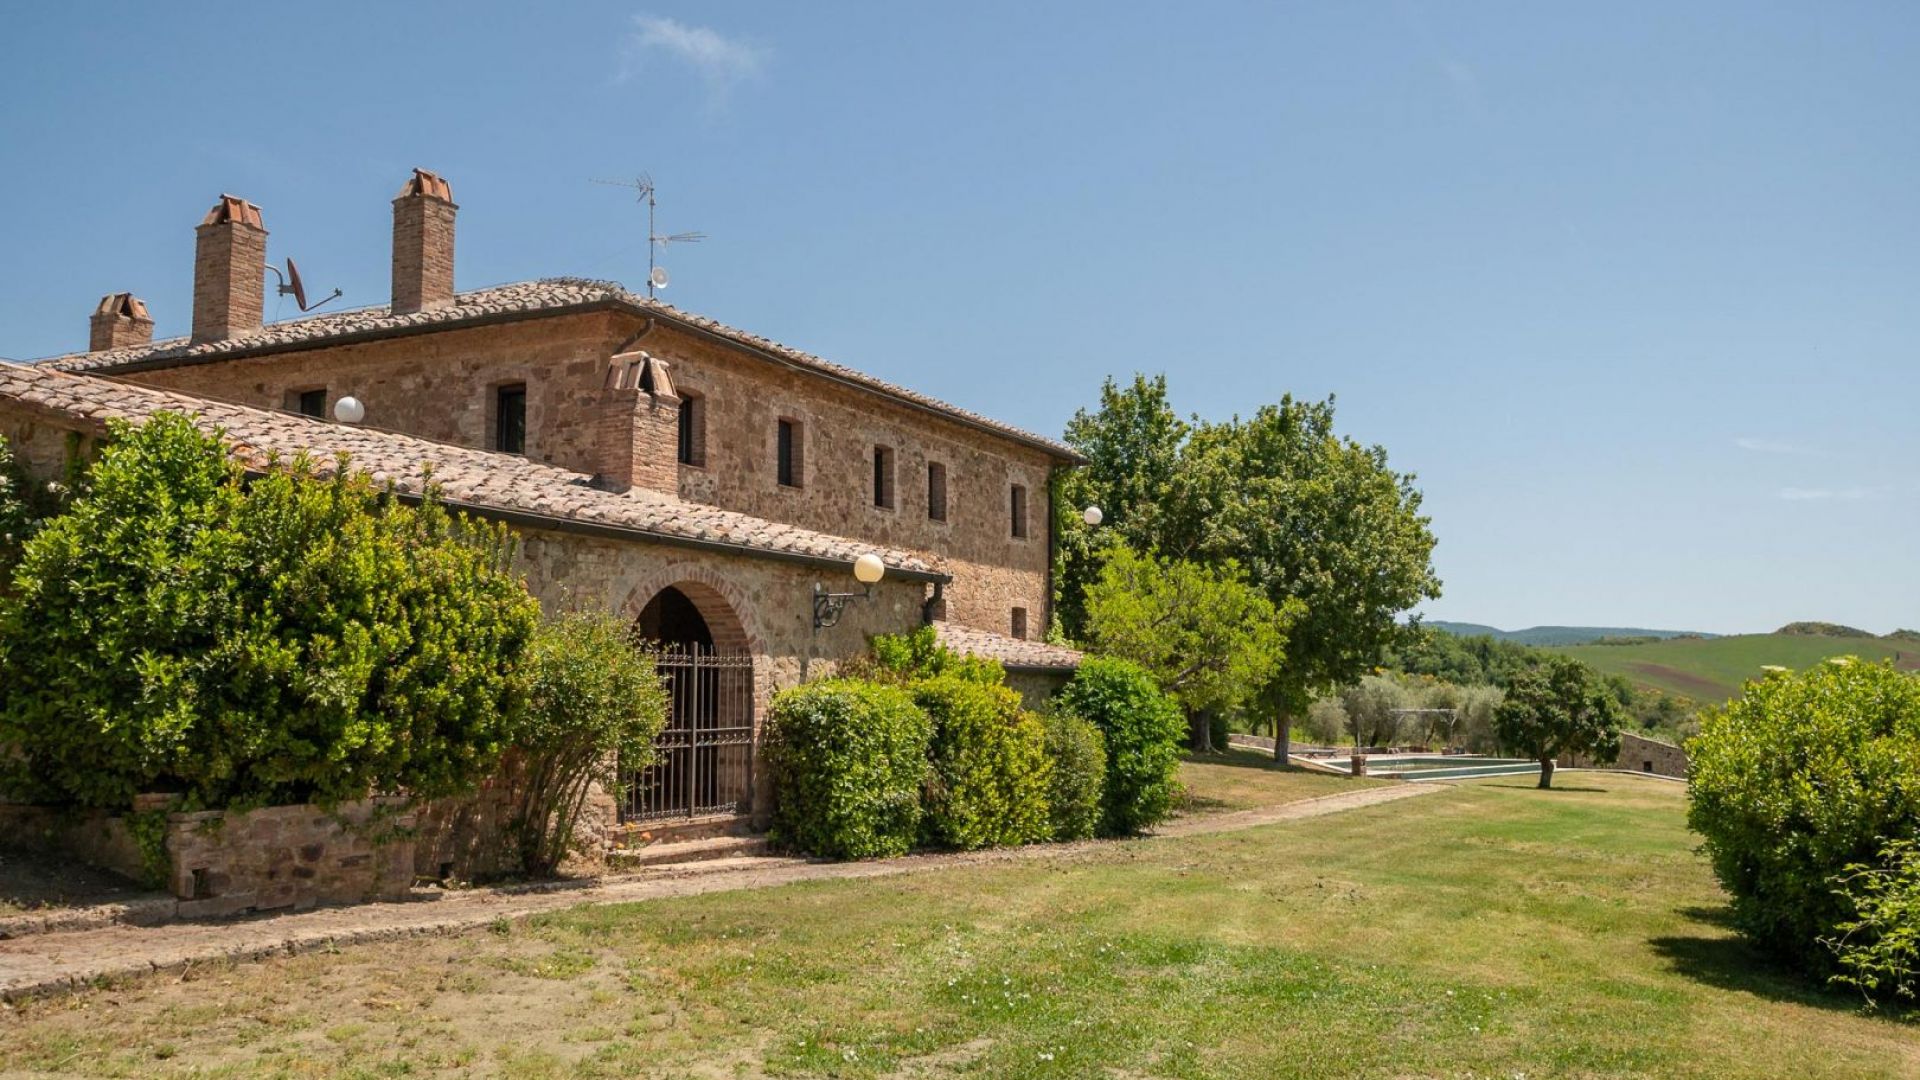 For sale cottage in  Pienza Toscana